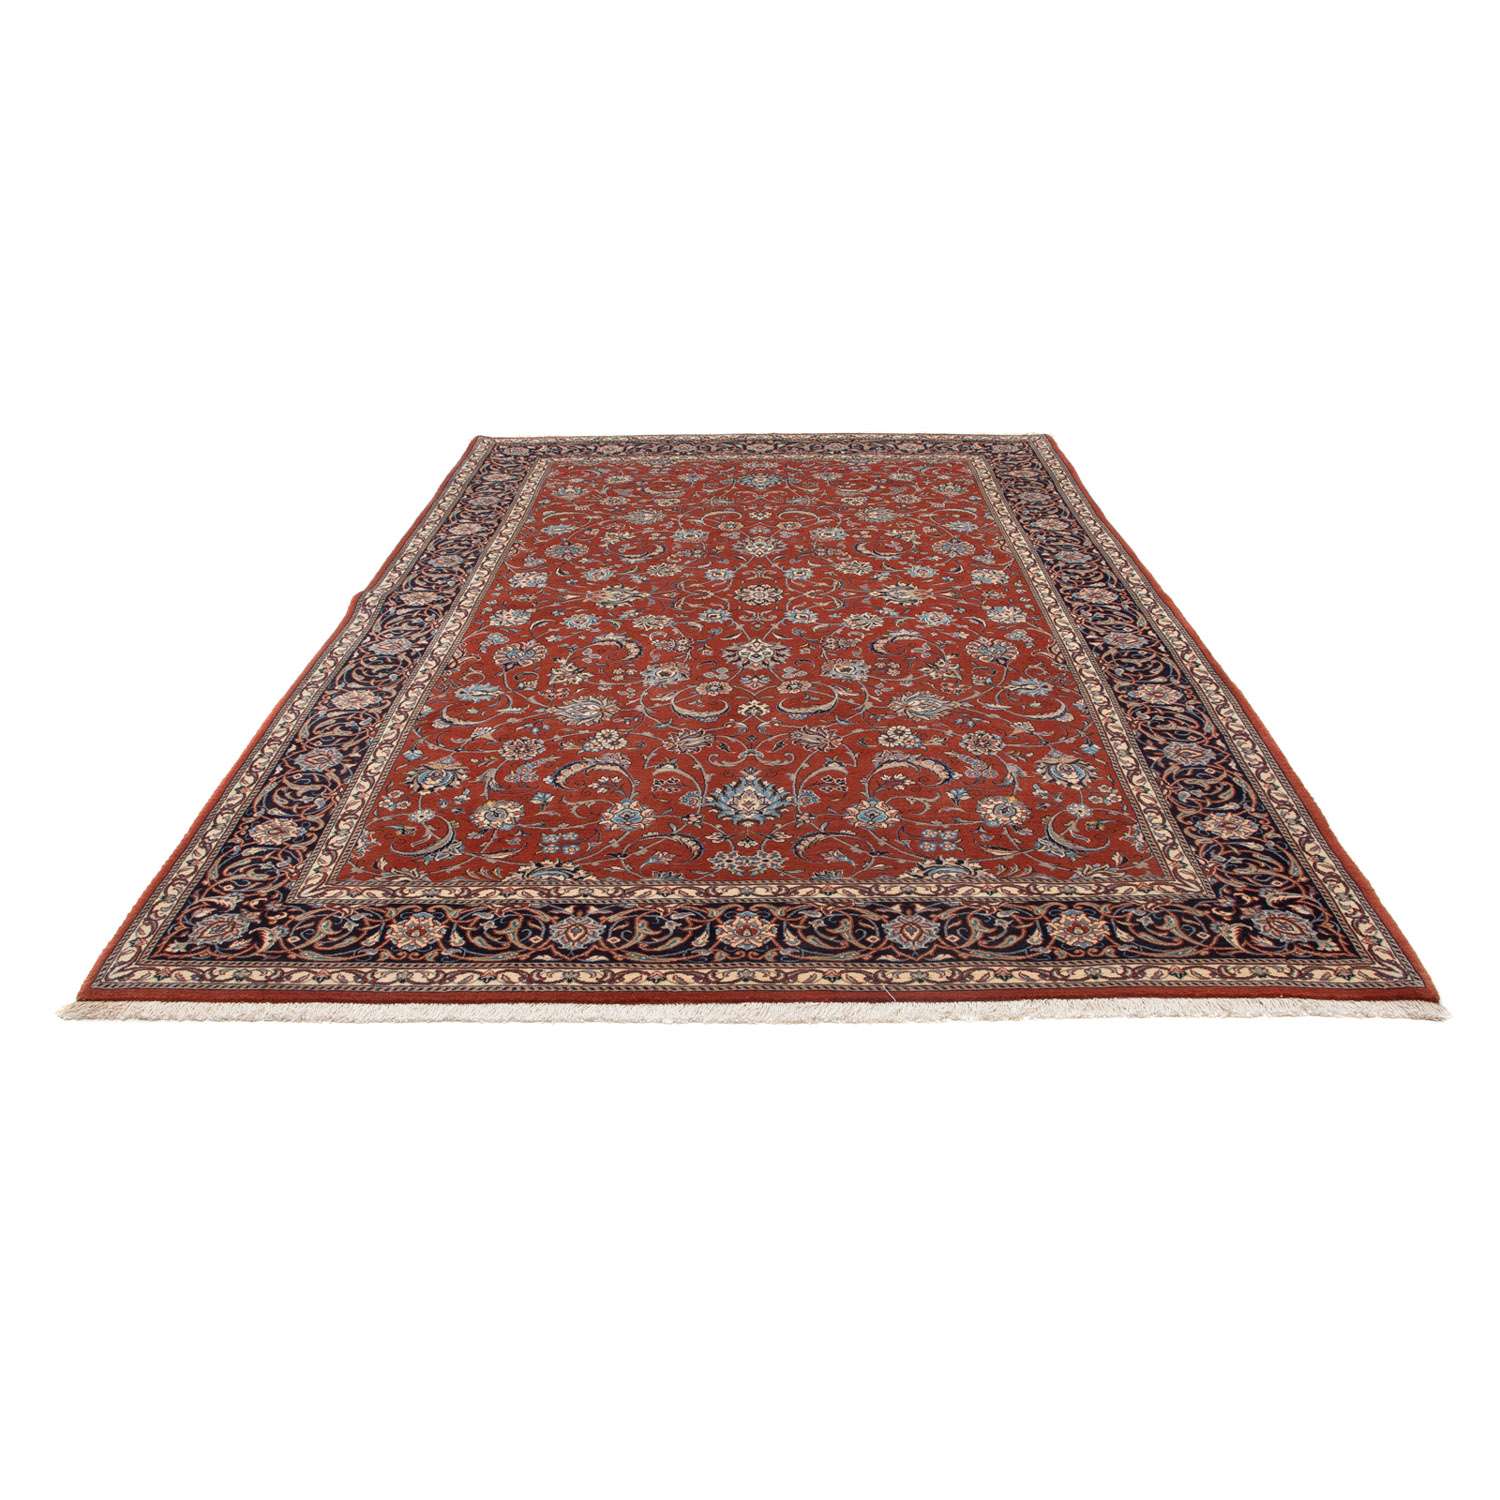 Perser Rug - Classic - 305 x 210 cm - red